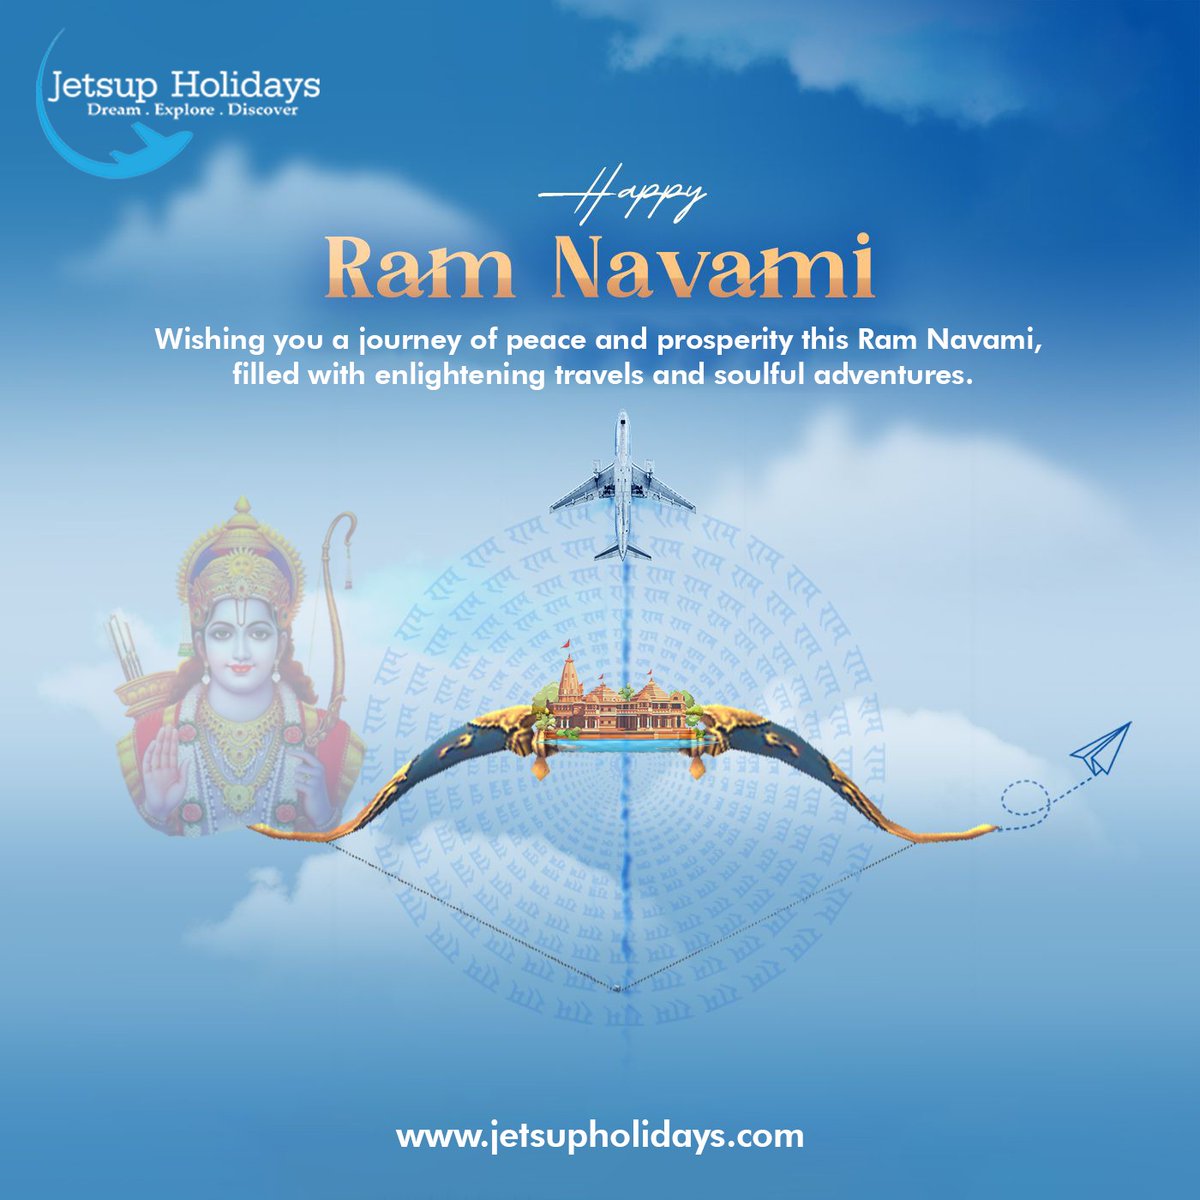 Wishing you a journey of peace and prosperity this Ram Navami, filled with enlightening travels and soulful adventures. #RamNavamiWishes #TravelBlessings #jetsupholidays #travellife #grouptour #ramnavami #HappyRamNavmi